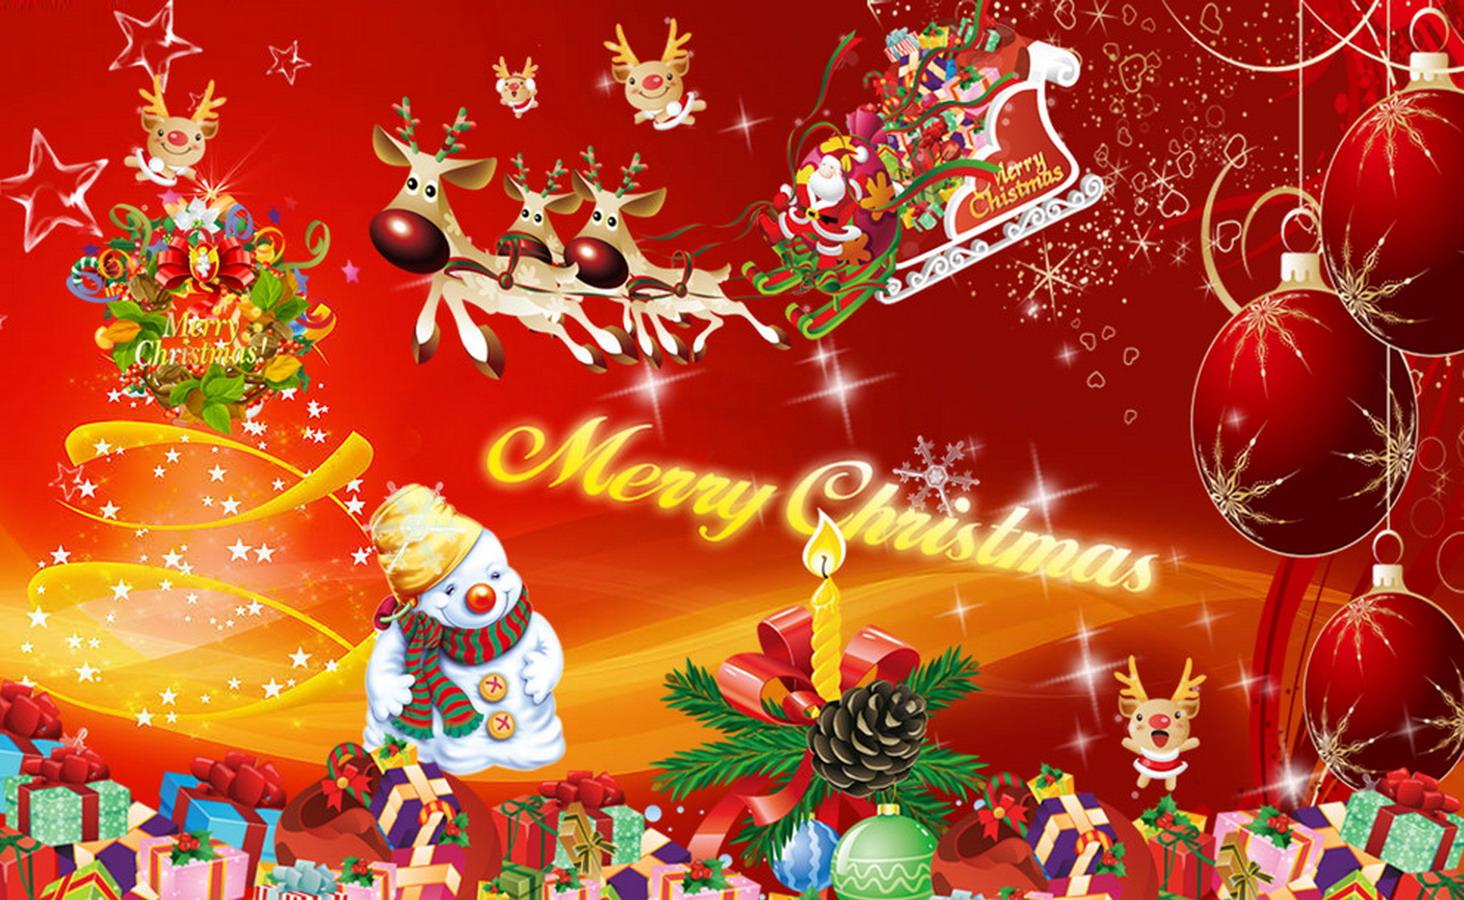 Merry Christmas Wallpaper Widescreen Android